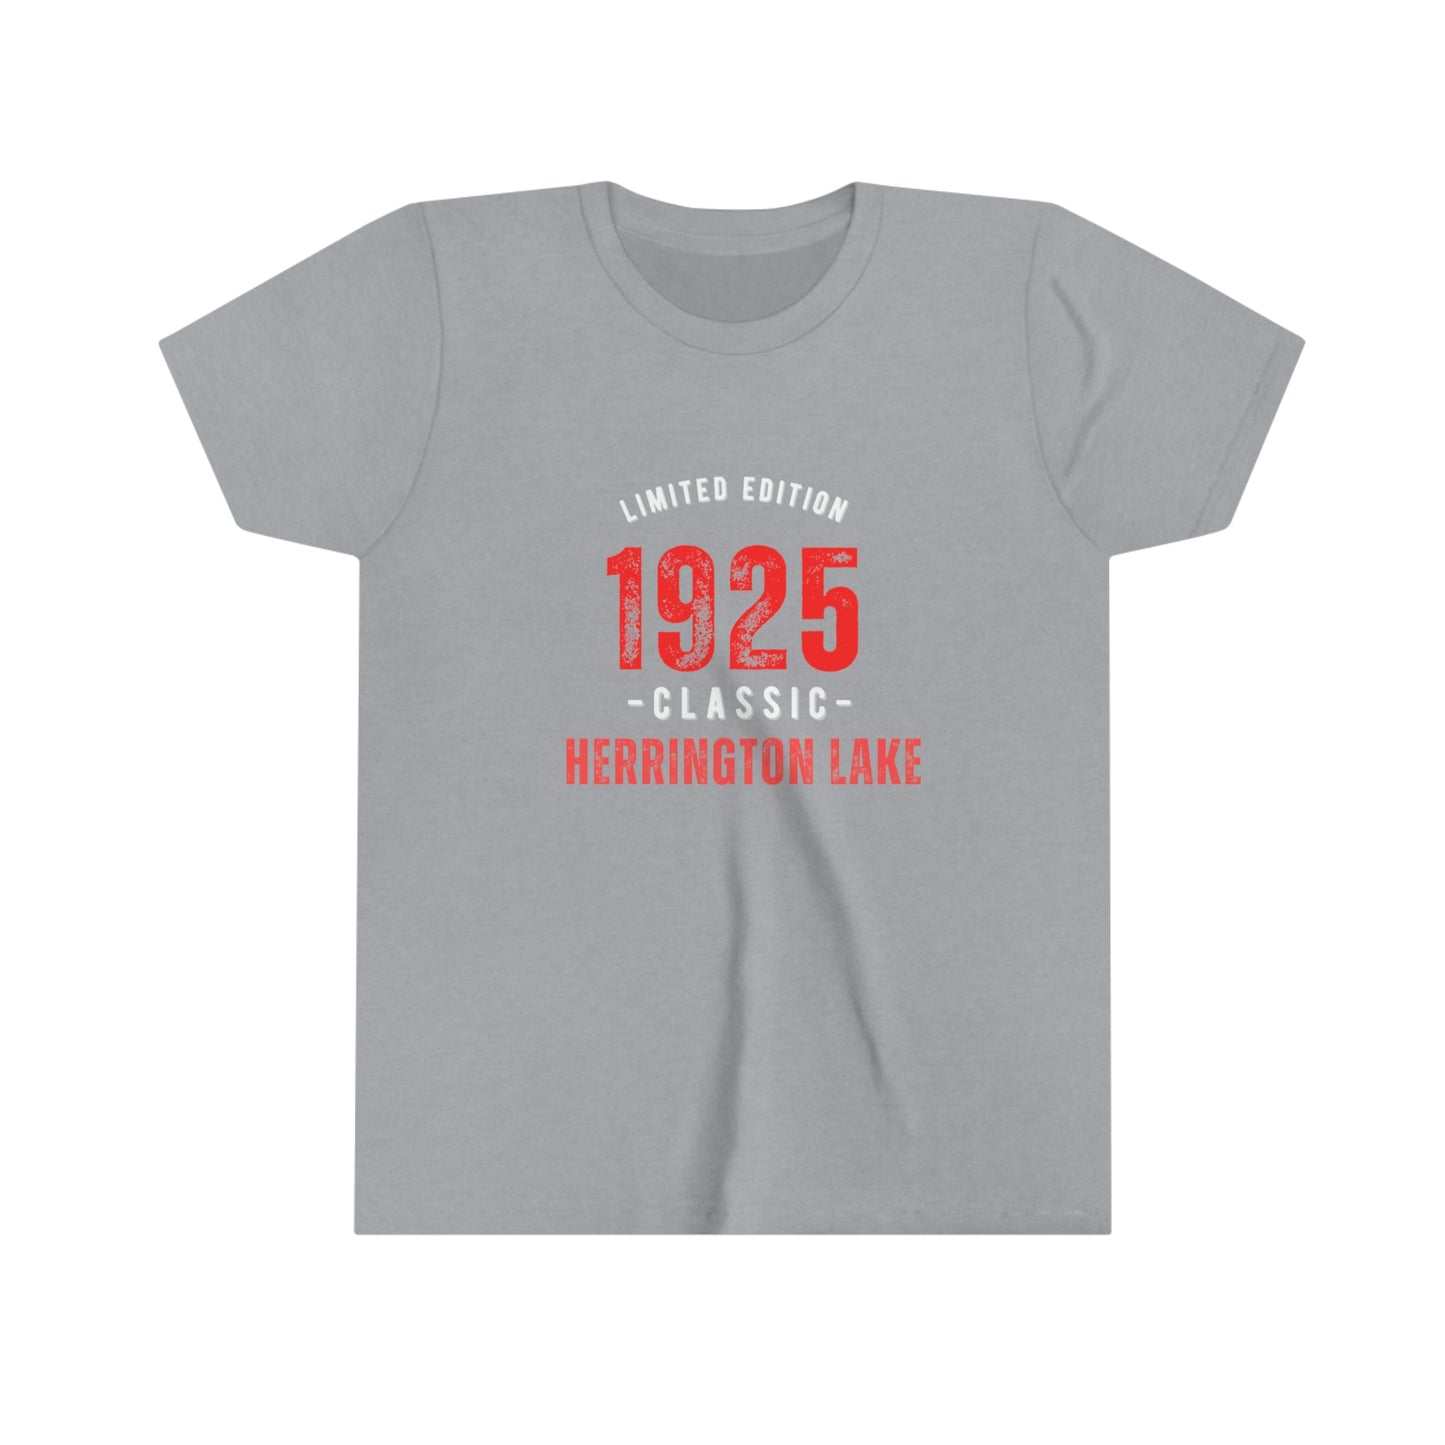 Youth 1925 Collection Limited Edition Herrington Lake Tee (Red Highlight)